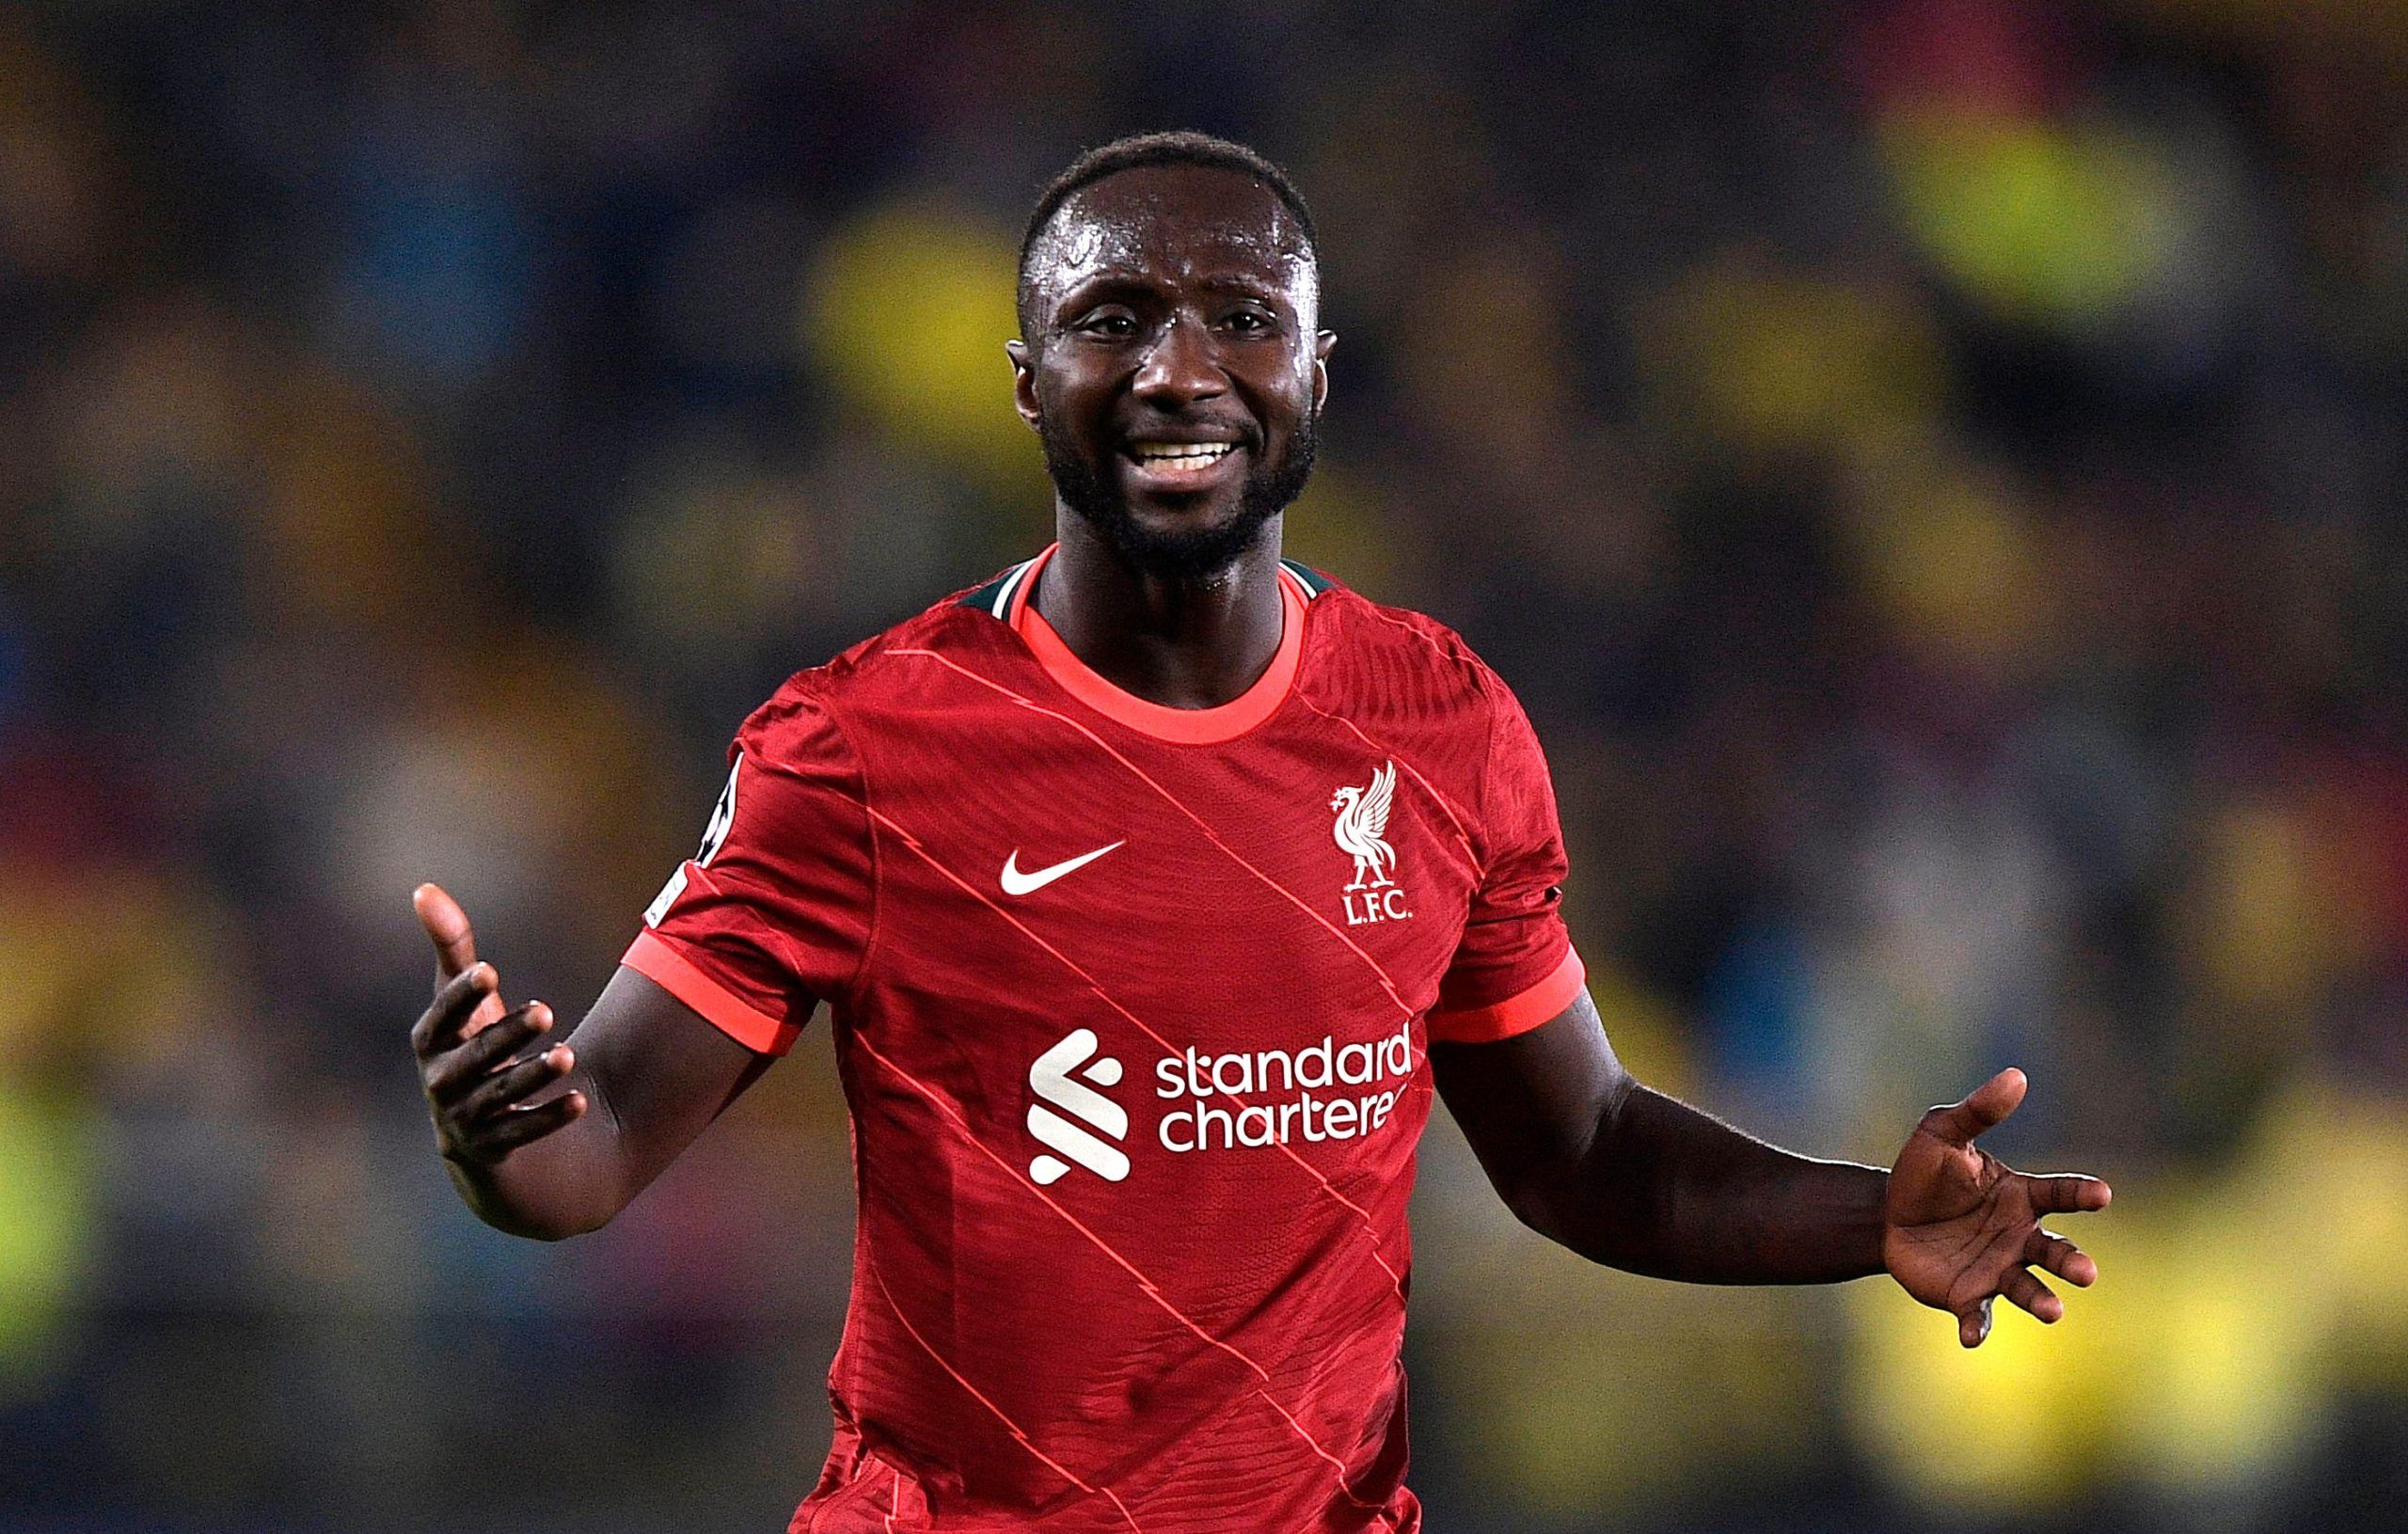 Liverpool: Naby Keita backed for potential contract extension -Liverpool News